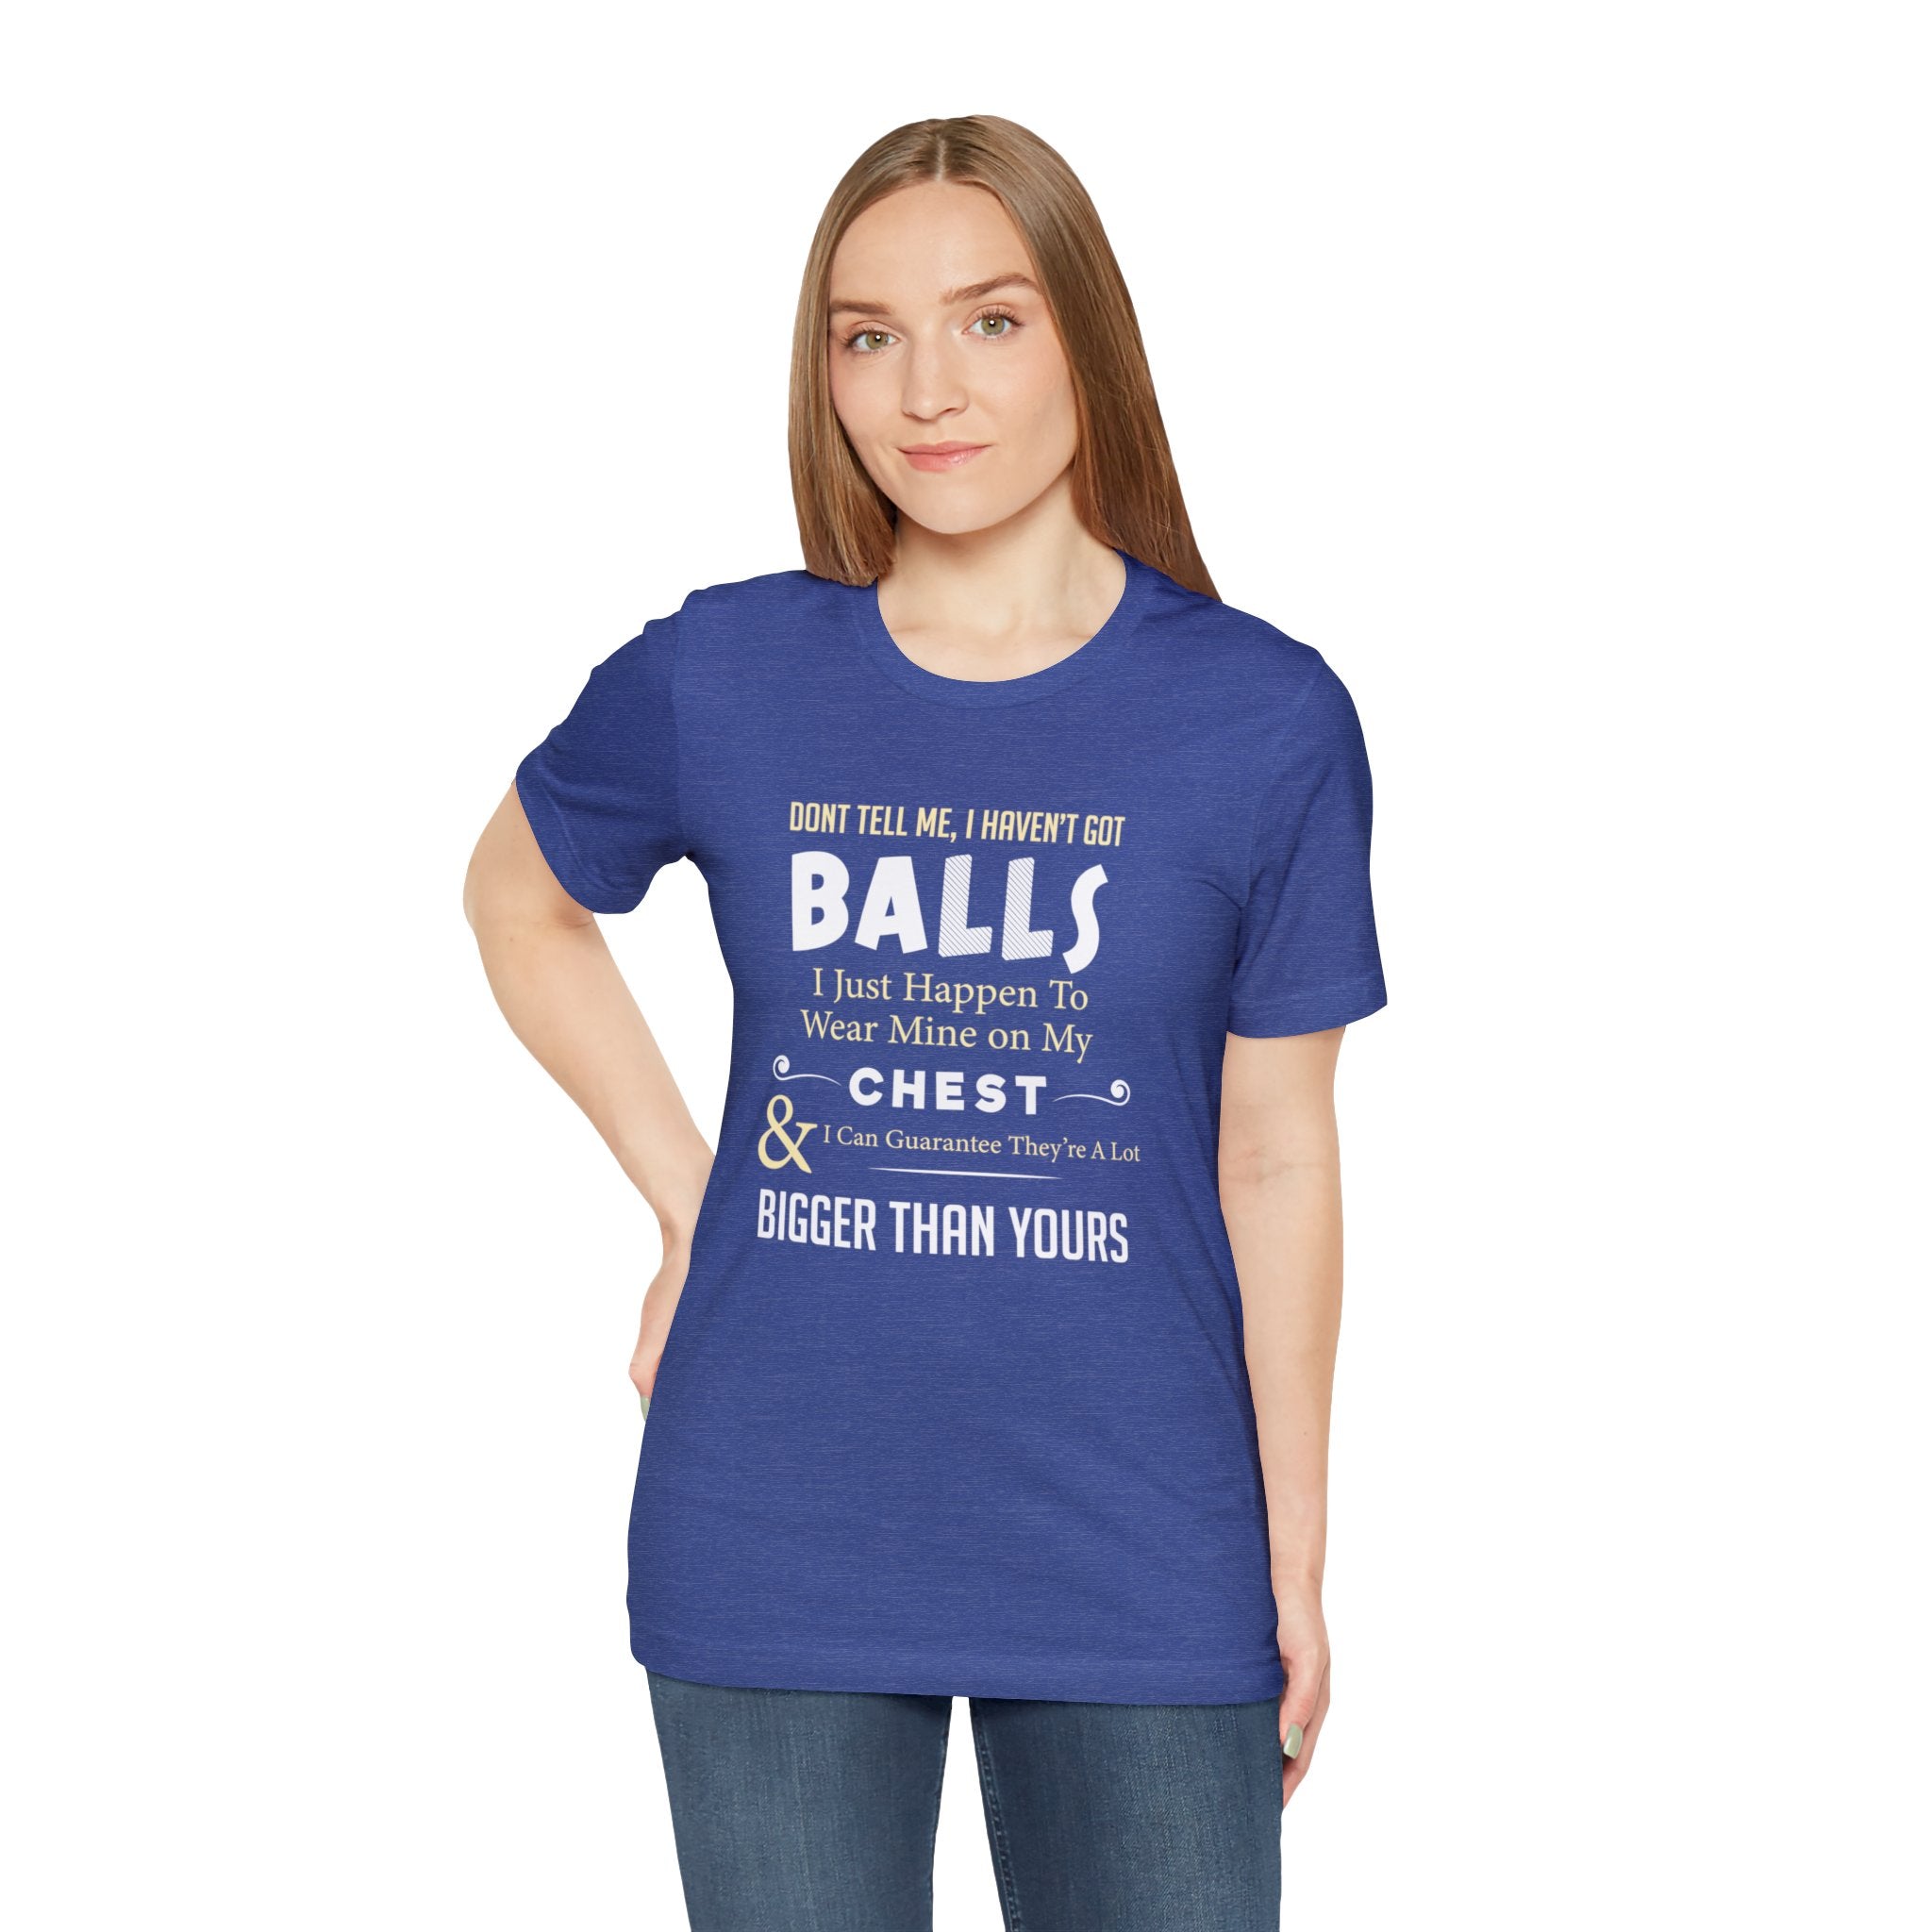 A woman wearing a Bigger Than Yours T-shirt that says, "ultimate statement piece" with the words "i want balls and i want a christ.